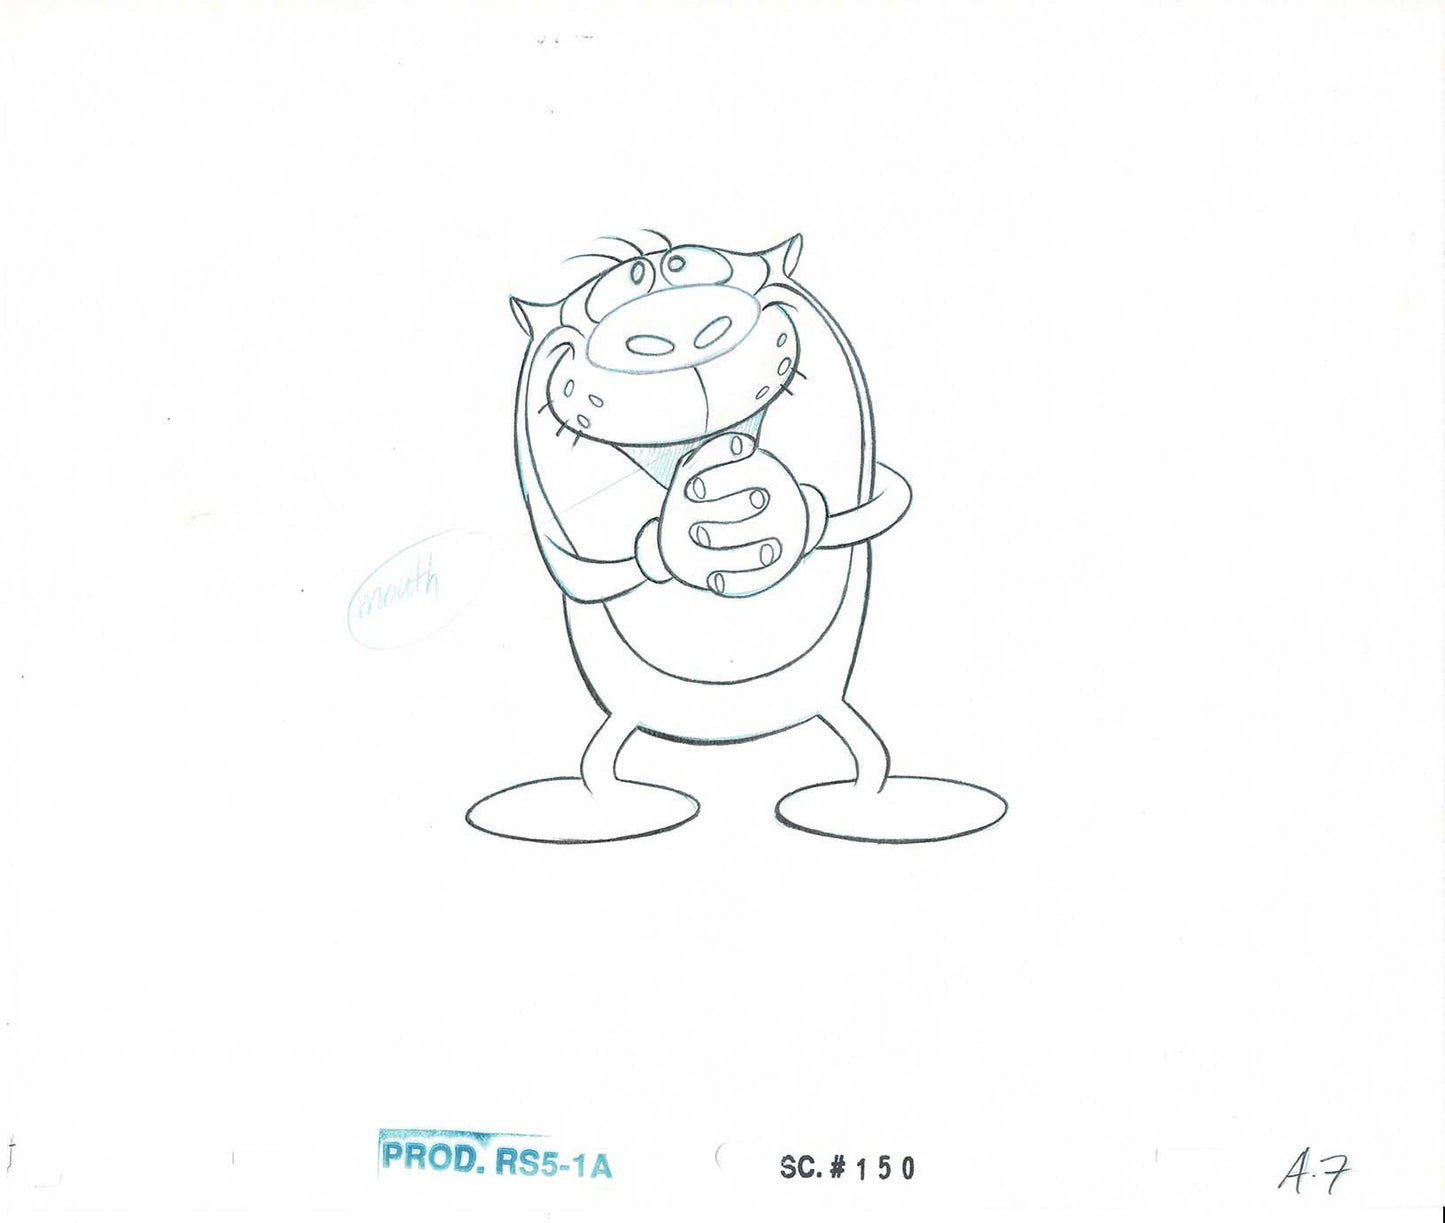 Ren and Stimpy Production Animation Cel Drawing from Nickelodeon 2003 A-A7